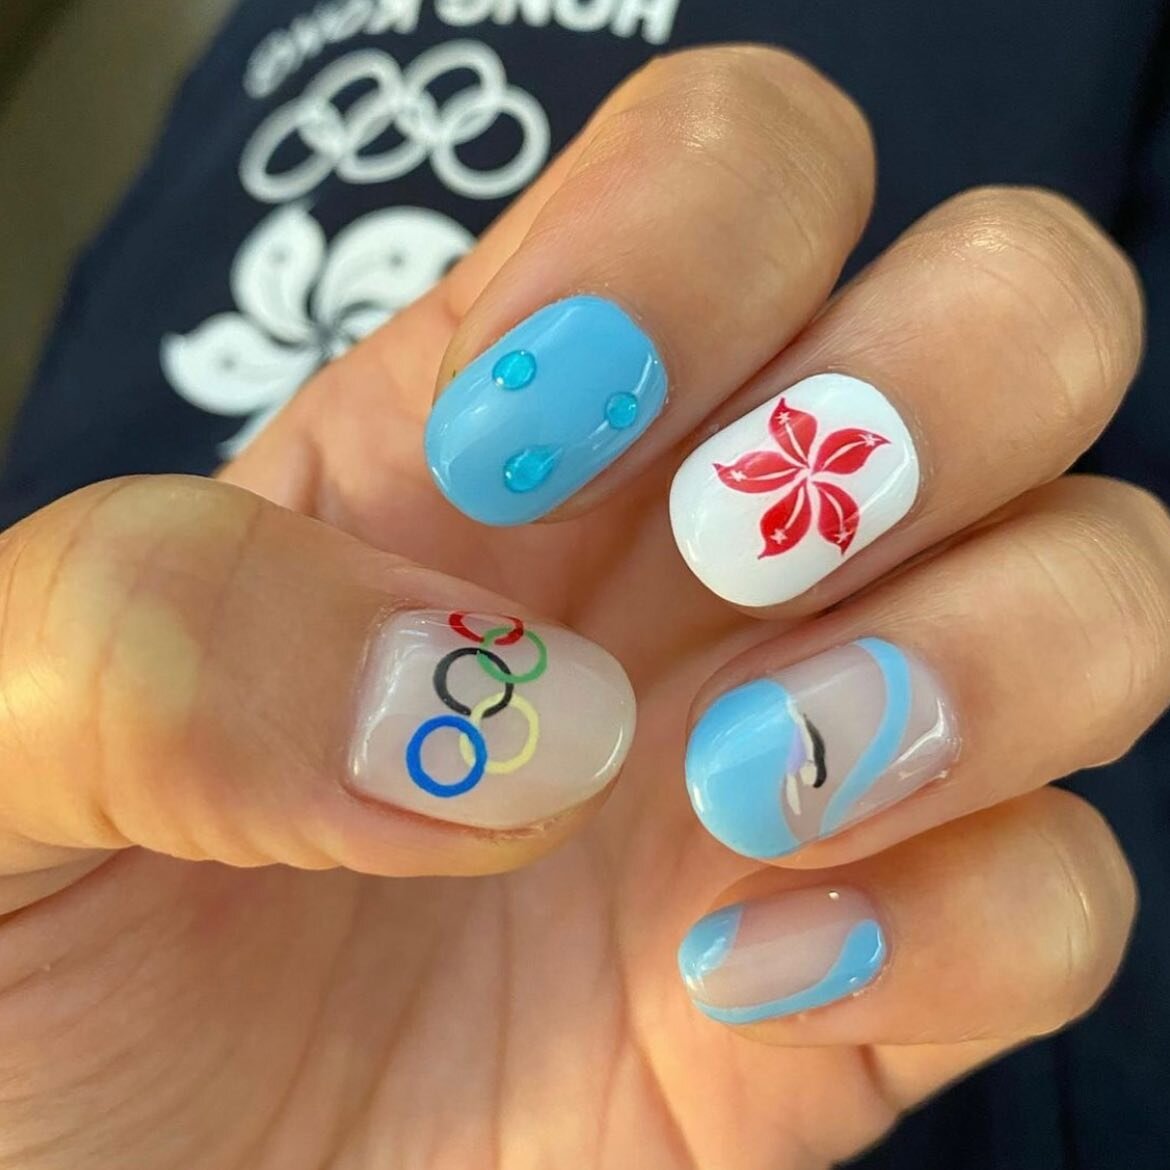 We had the pleasure to work with 🇭🇰 HK&rsquo;s Olympic swimmer @camillelcheng to keep her pre race tradition going!  Camille gets nail art before every important race and we were honored to work with her to create this custom design. 
⁡
We were exc